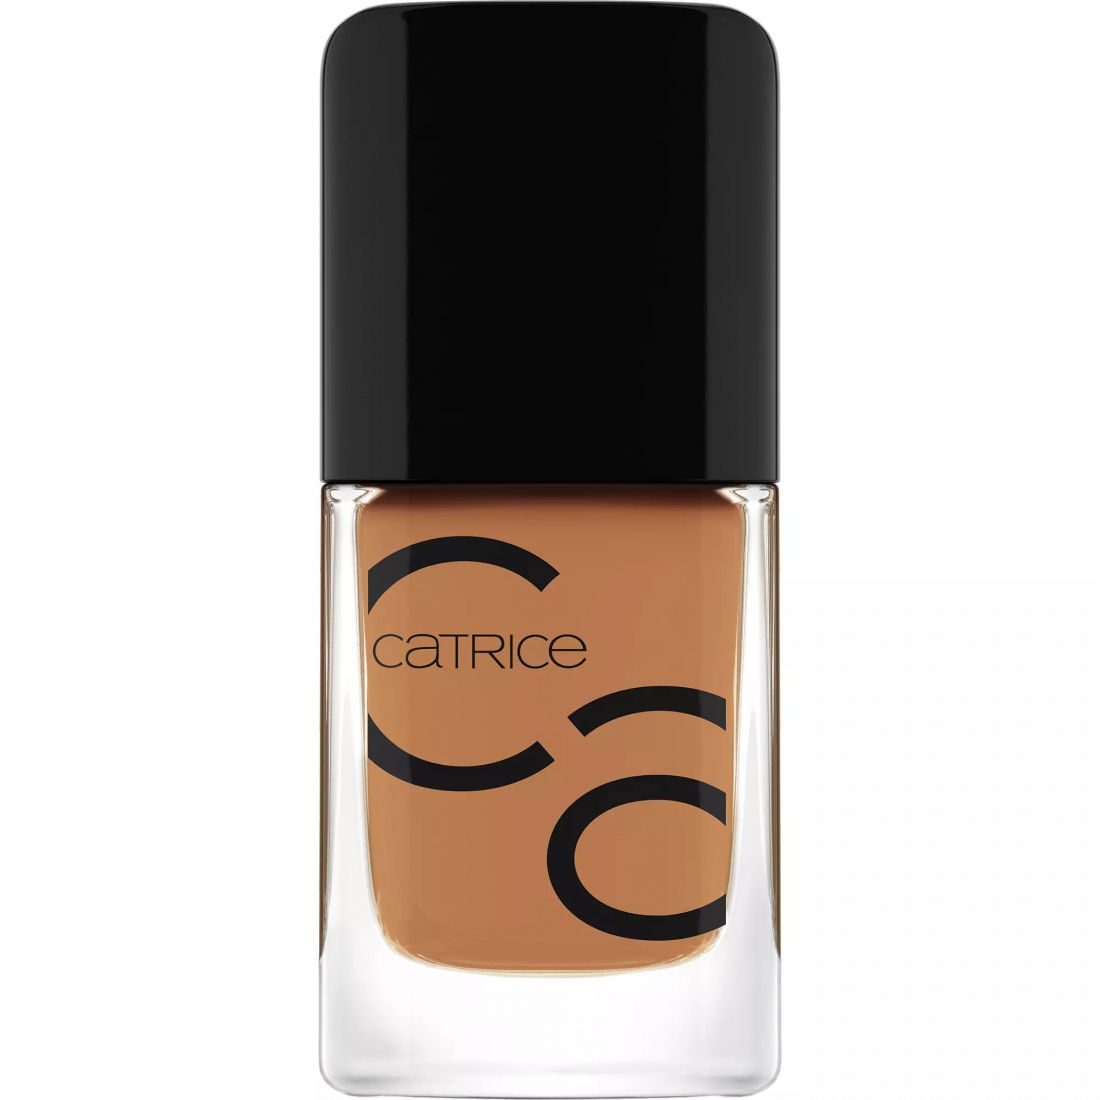 Catrice - Vernis à ongles en gel 'Iconails' - 125 Toffee Dreams 10.5 ml